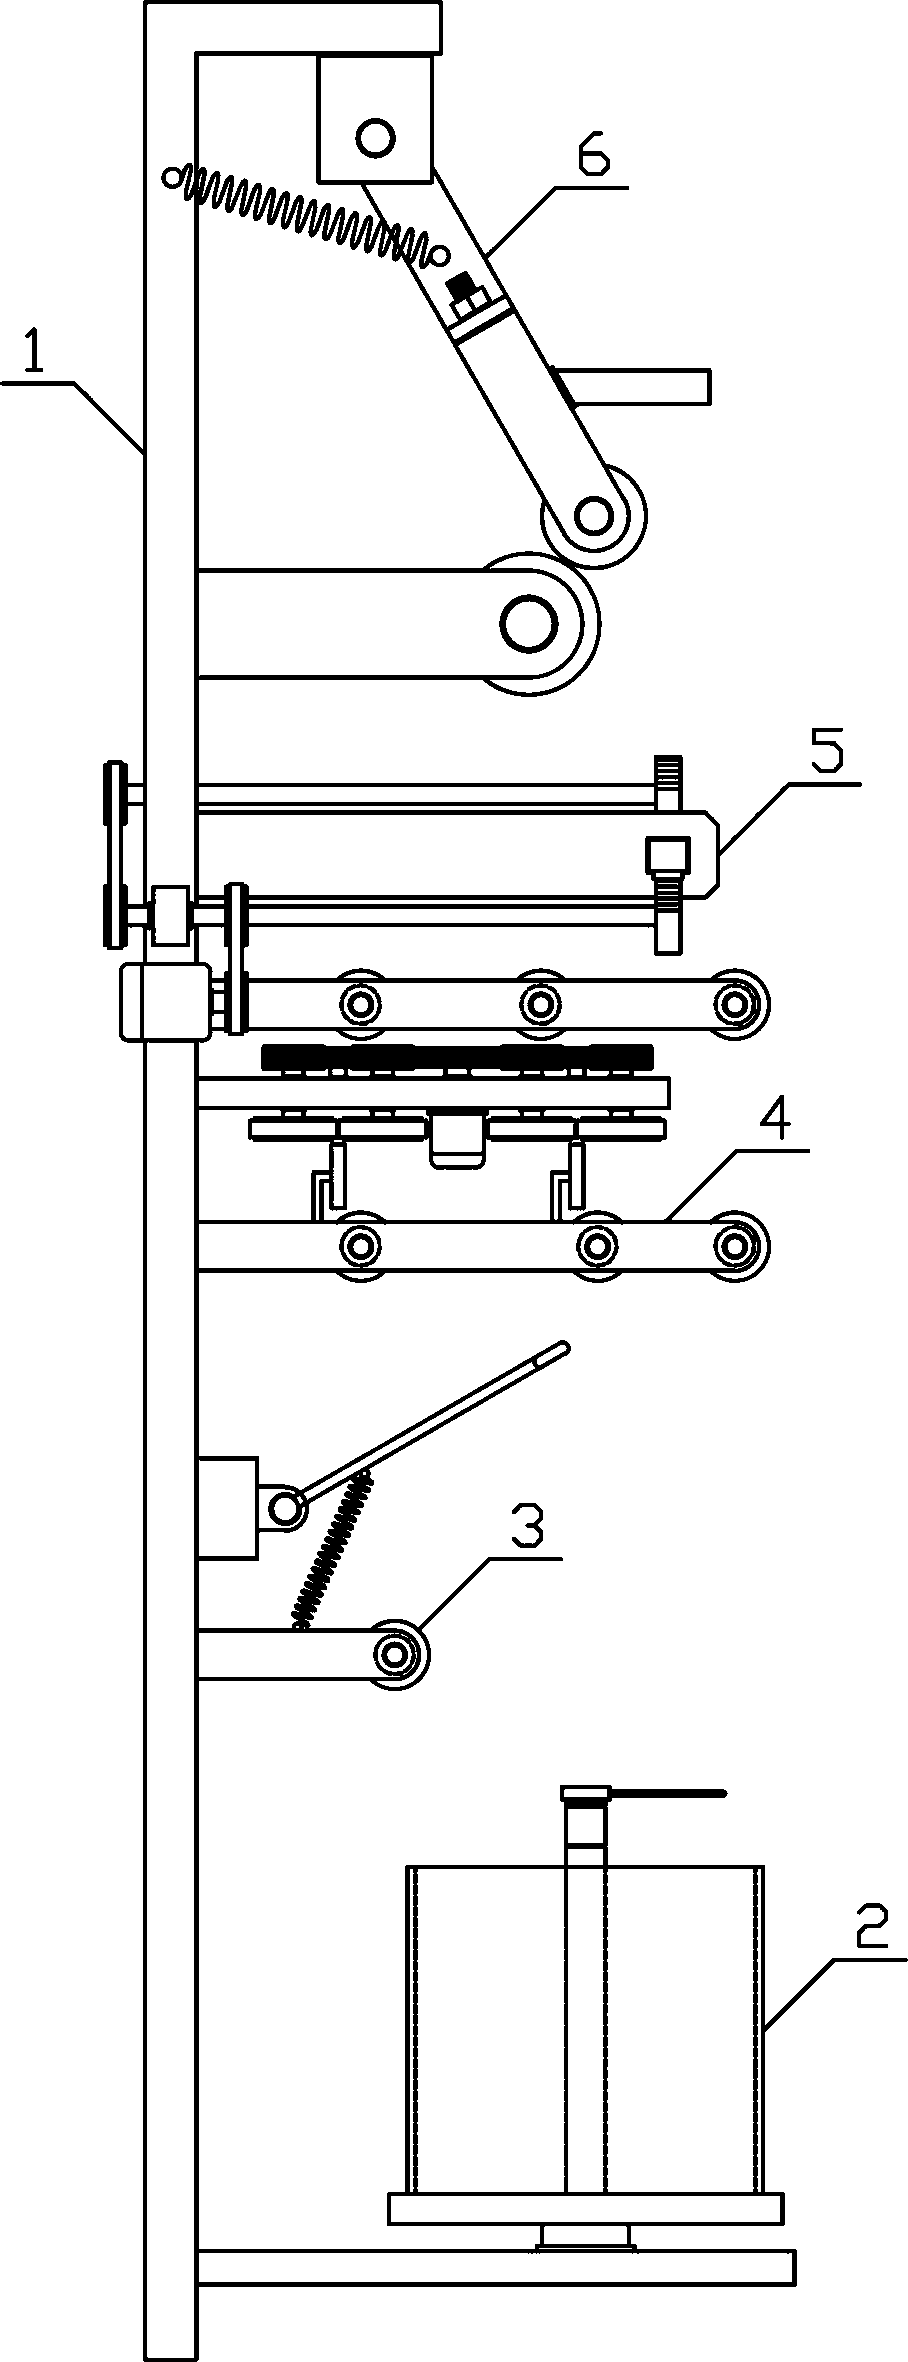 Yarn continuous twisting device